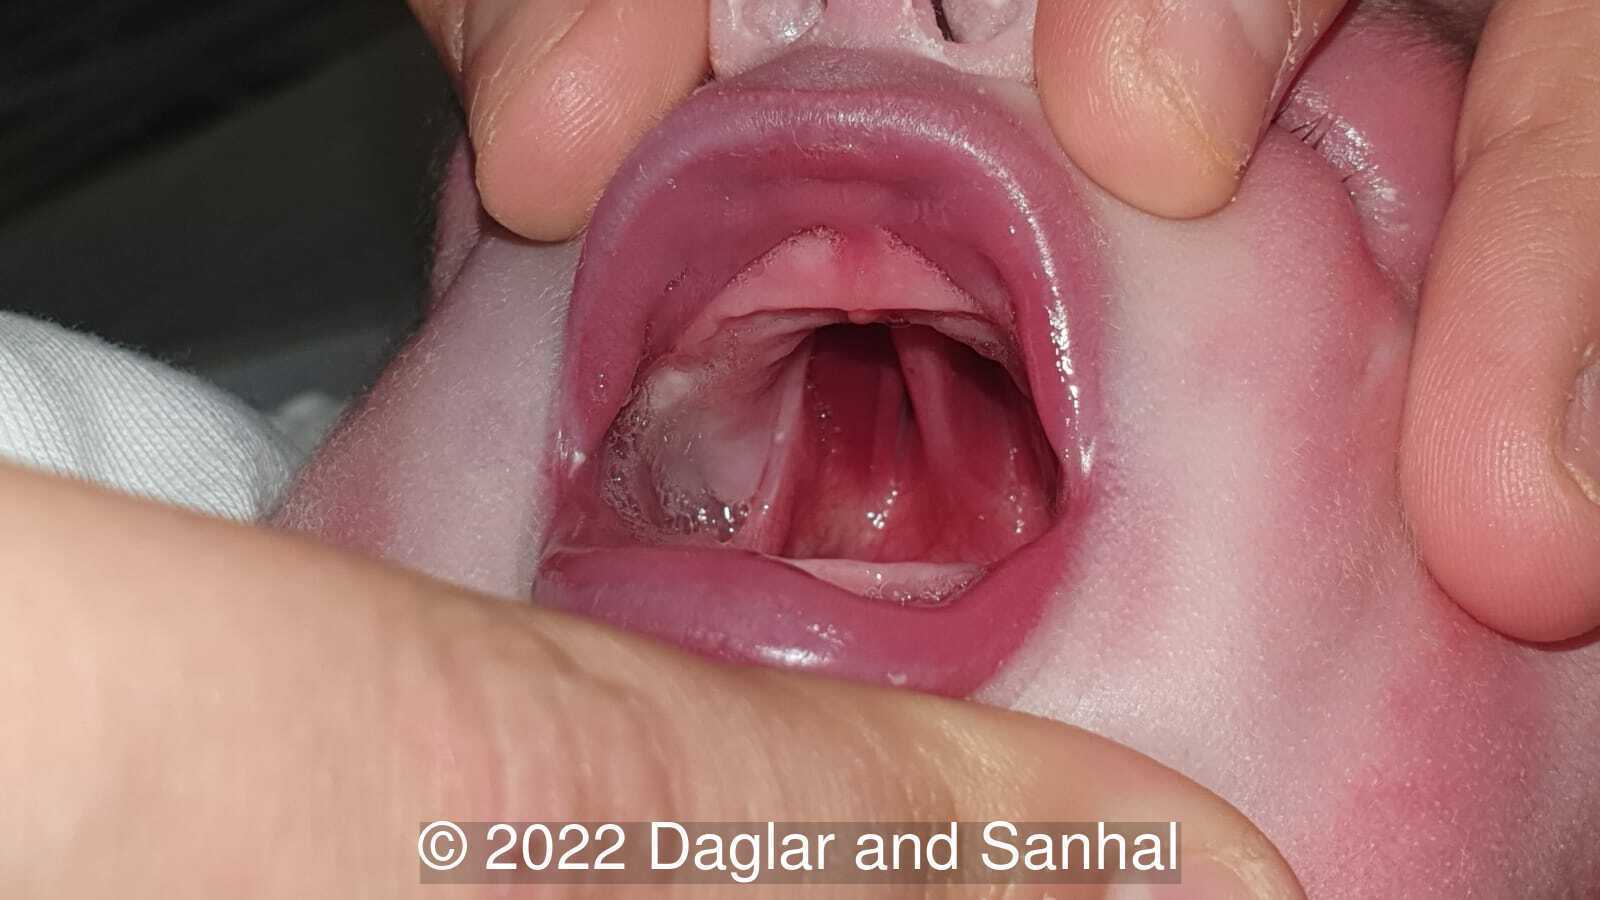 Midline cleft of the hard and soft palate with intact premaxilla.